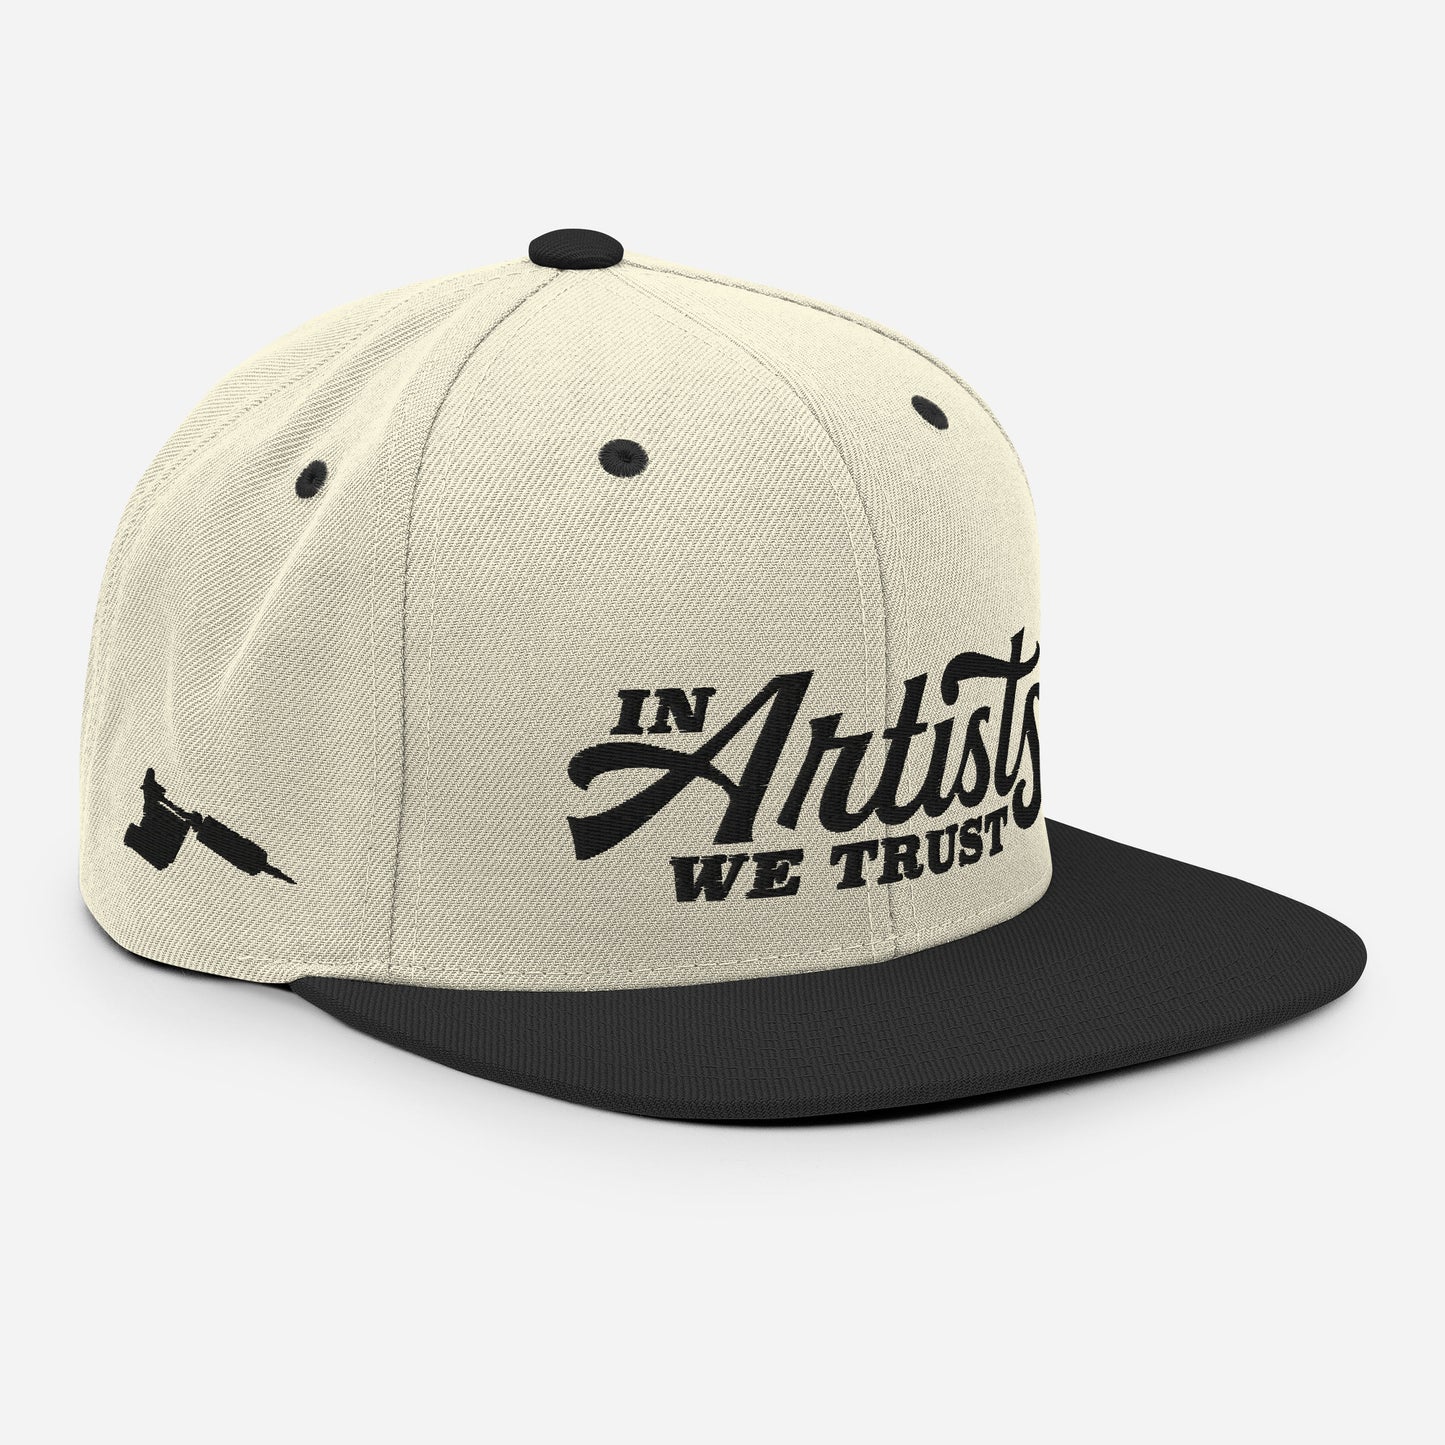 IN ARTISTS WE TRUST TRADITION SNAPBACK